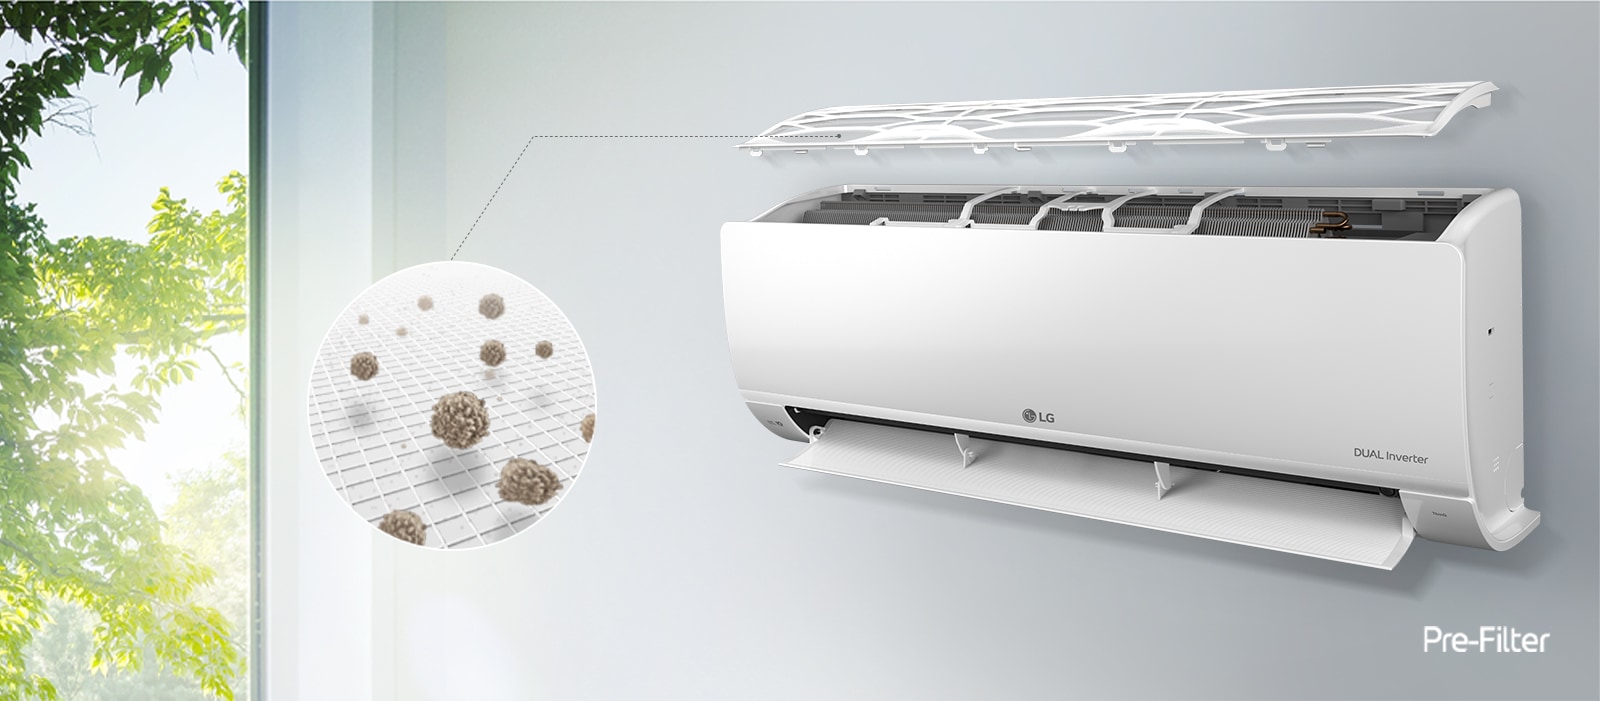 An air conditioner with an open filter, and a detail cut that dust being filtered